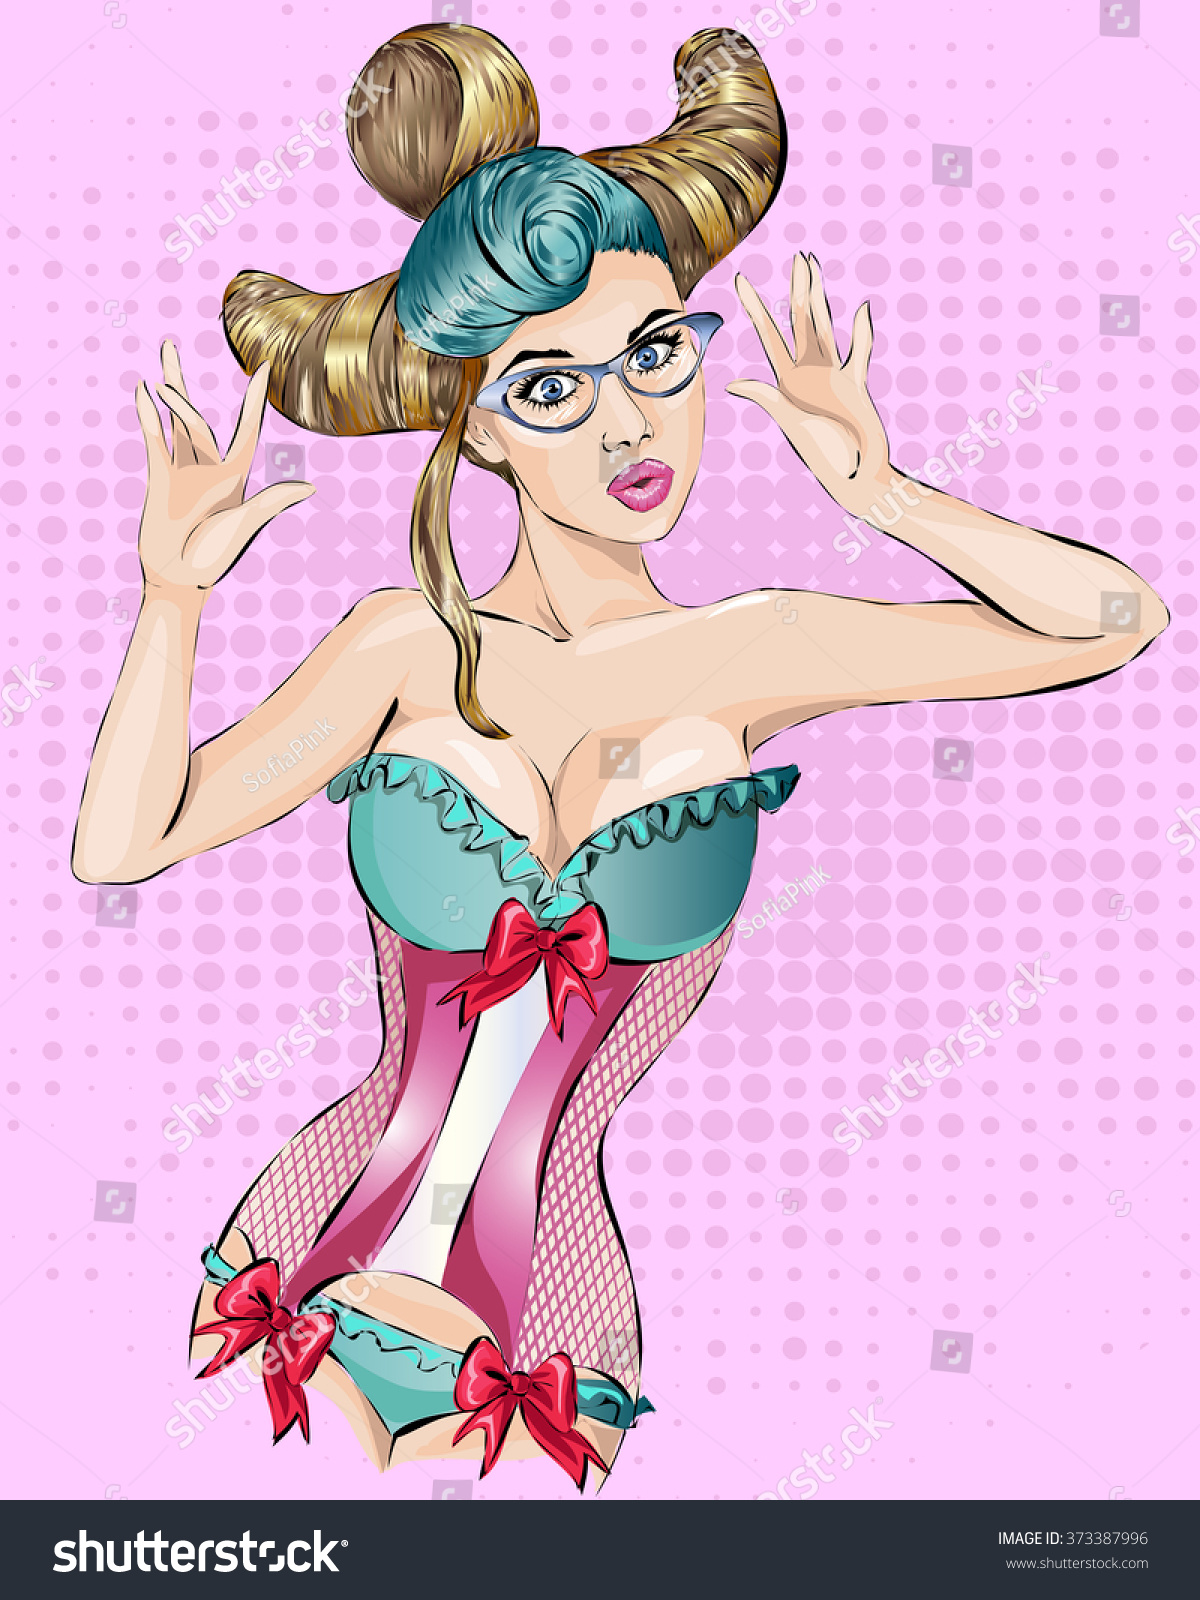 Sexy Pinup Girl Lingerie Vector Illustration Stock Vector Royalty Free 373387996 Shutterstock